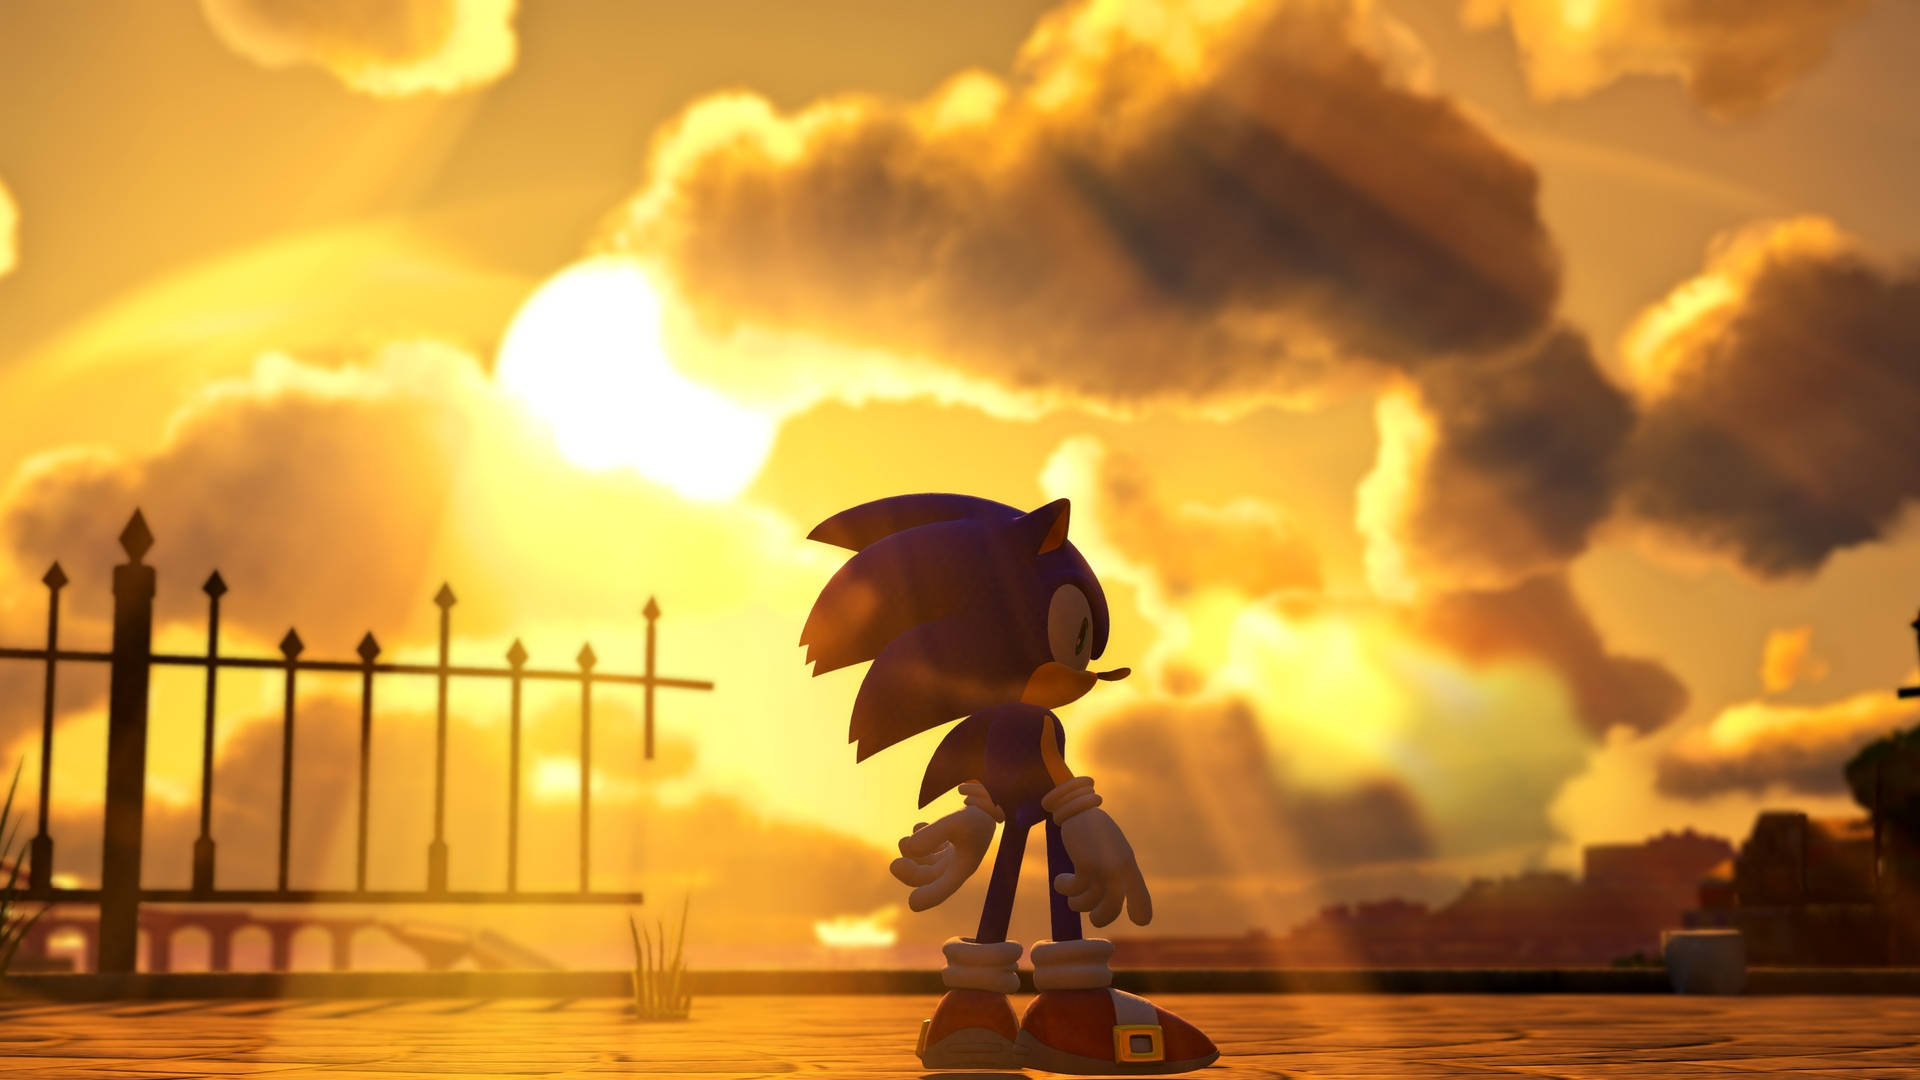 Free Cool Sonic Wallpaper Downloads, Cool Sonic Wallpaper for FREE